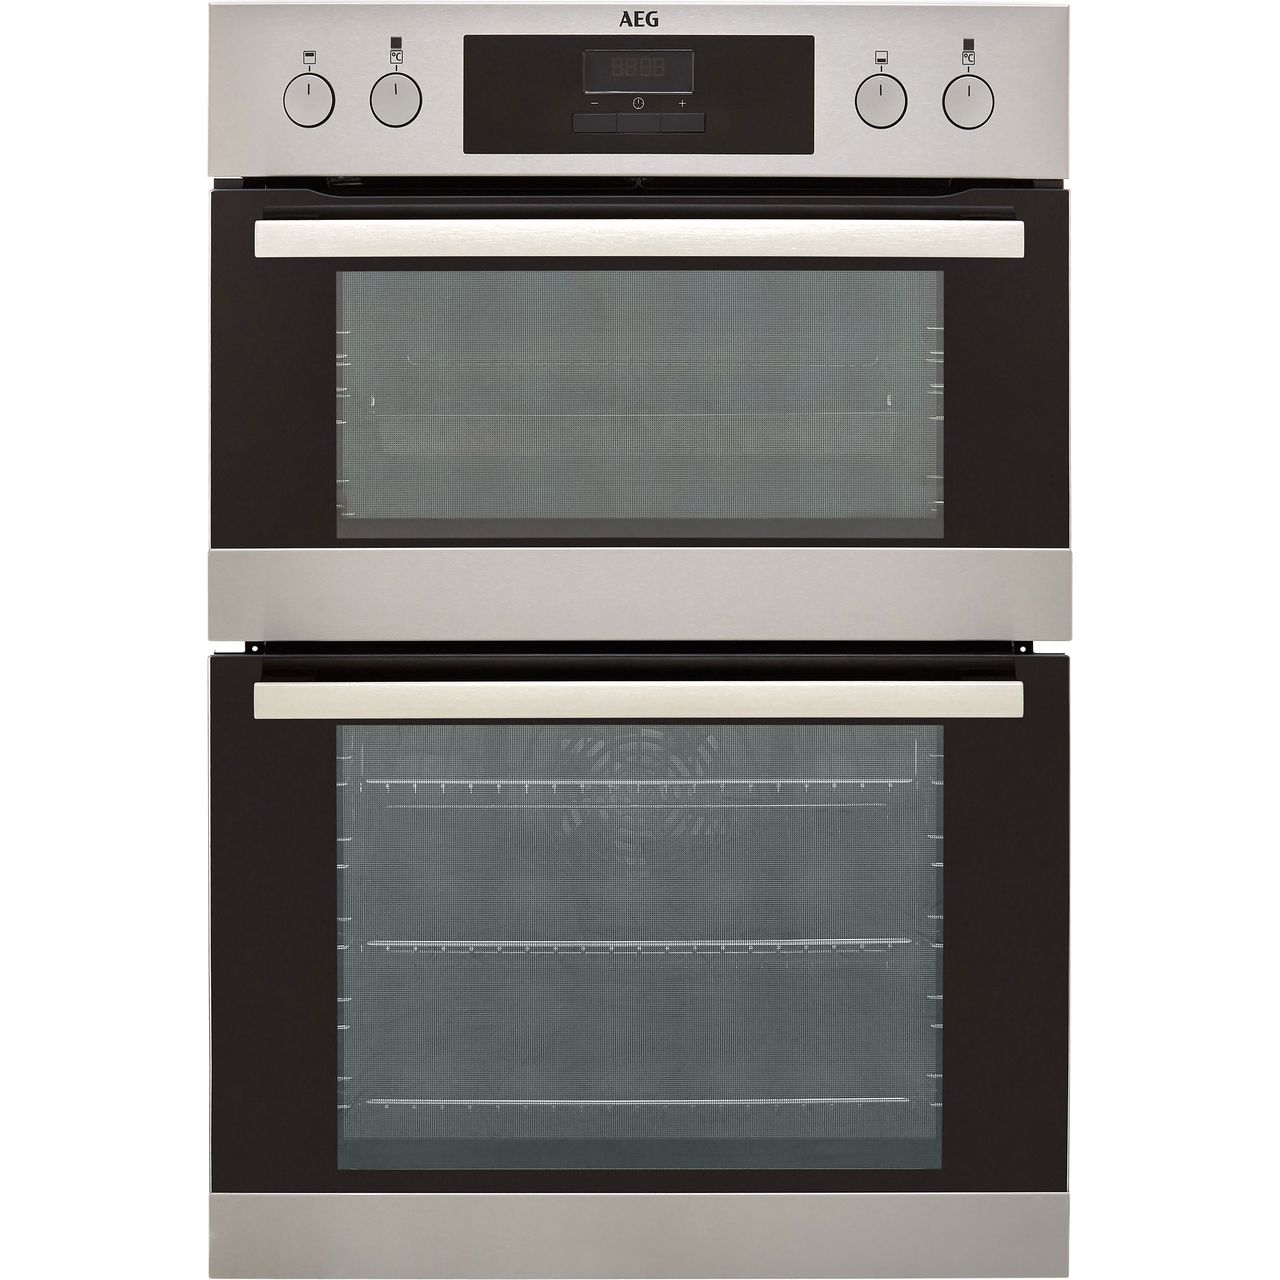 AEG DEB331010M Built In Double Oven Review